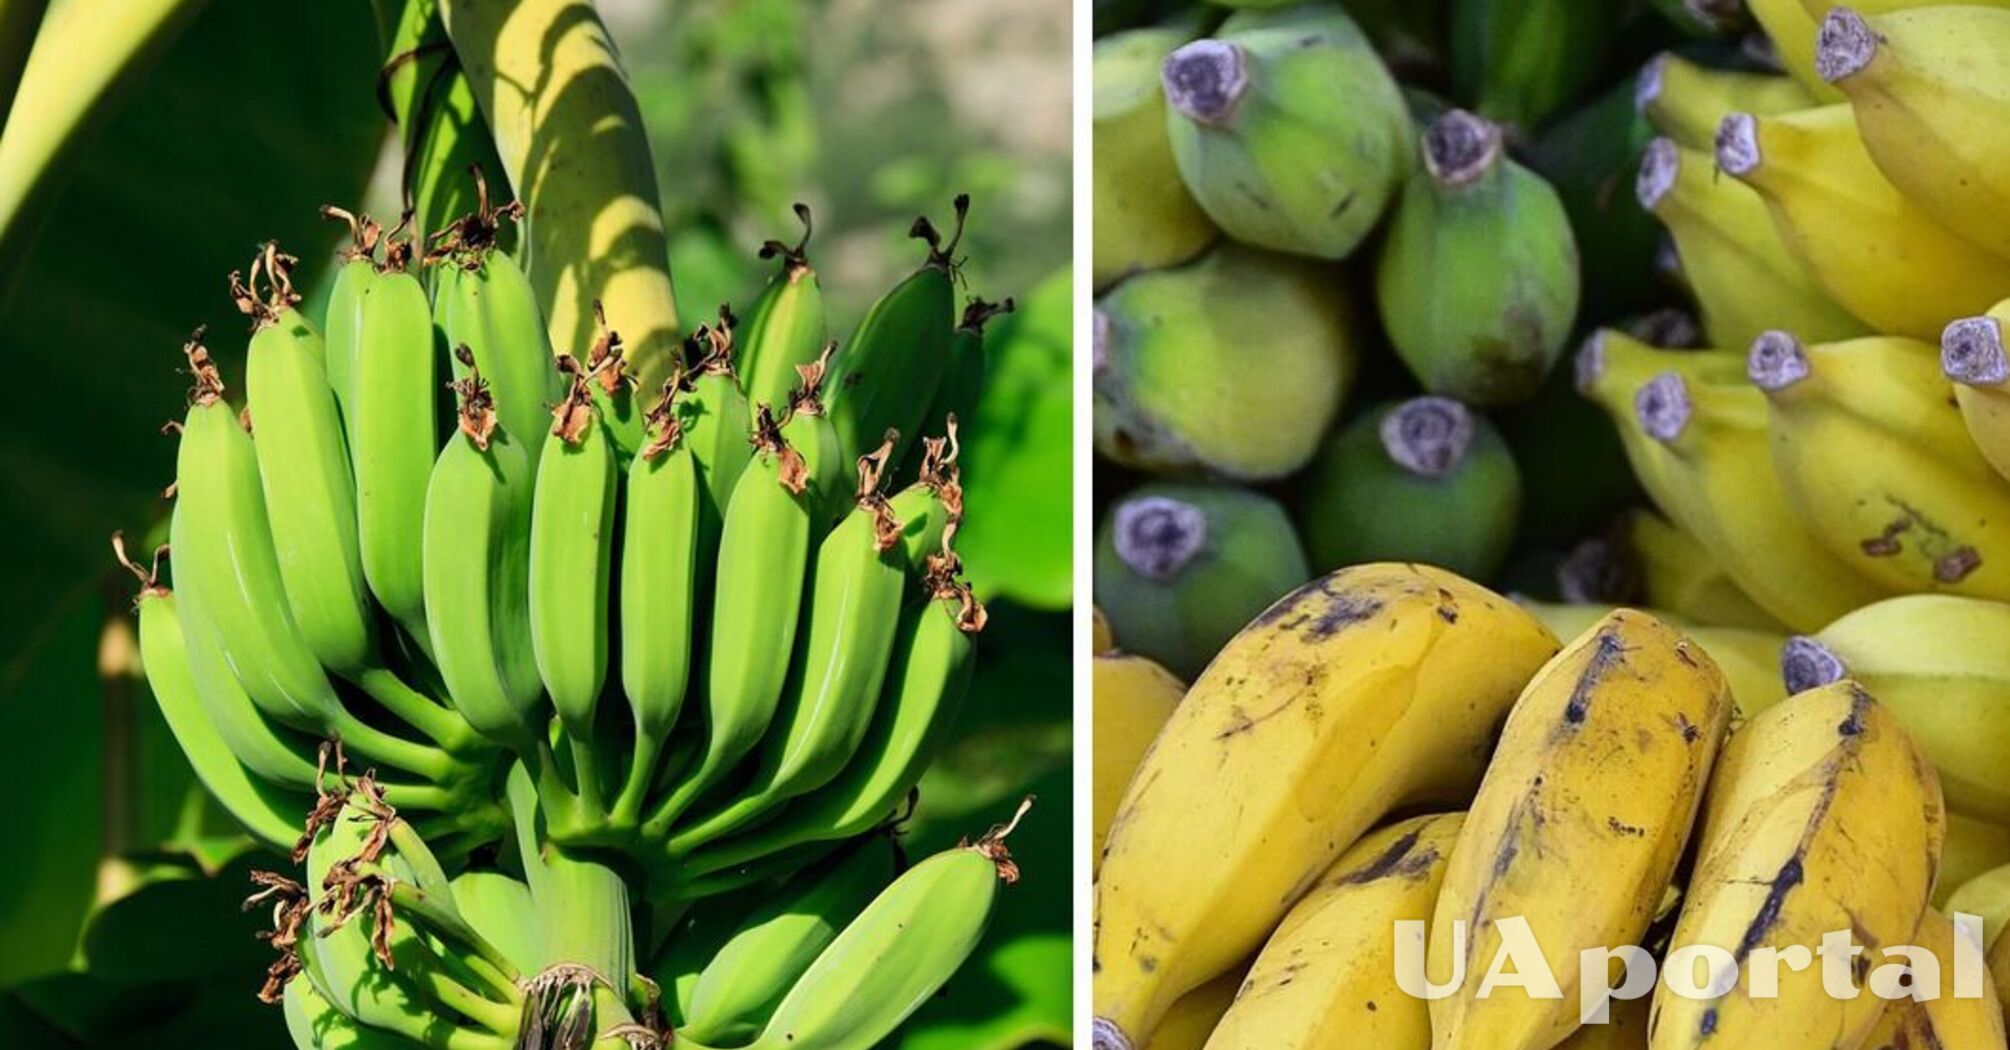 Experts tell you how to speed up the ripening of green bananas and where to keep them when they are ripe